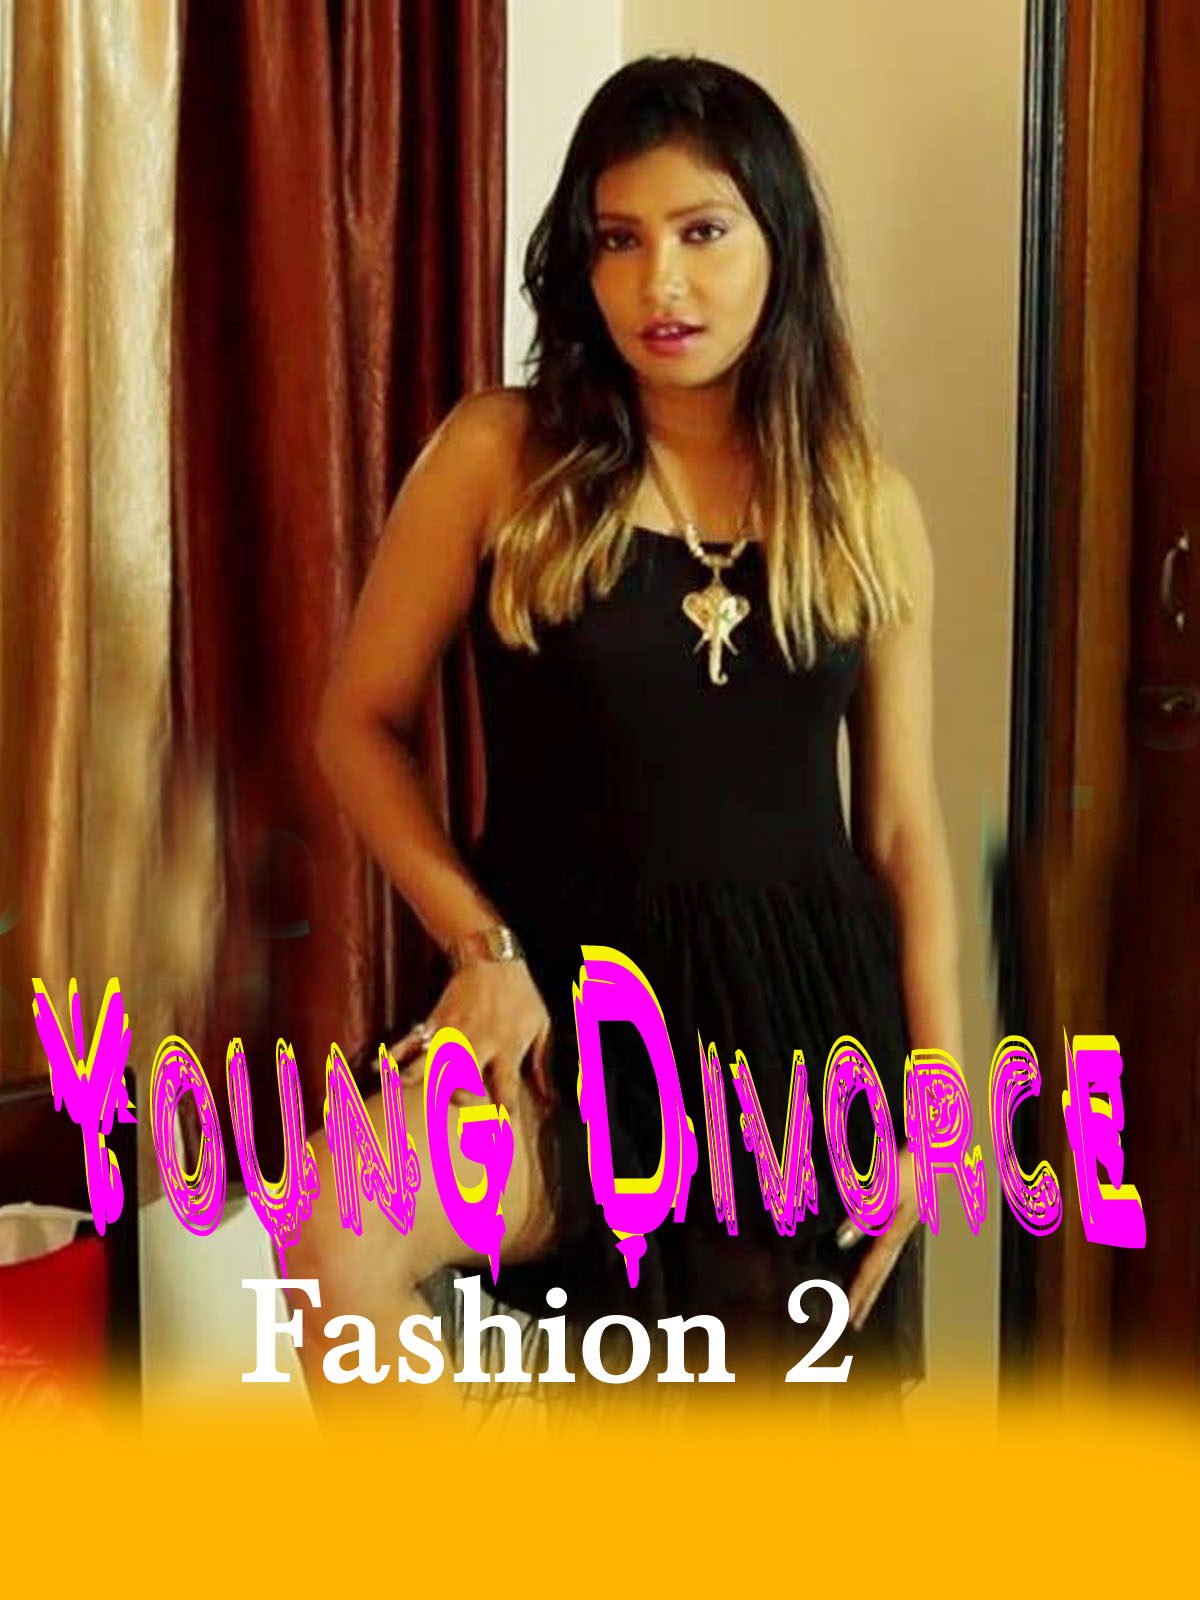 You are currently viewing 18+ Young Divorce Fashion 2 2020 iEntertainment Originals Hot Video 720p HDRip 100MB Download & Watch Online